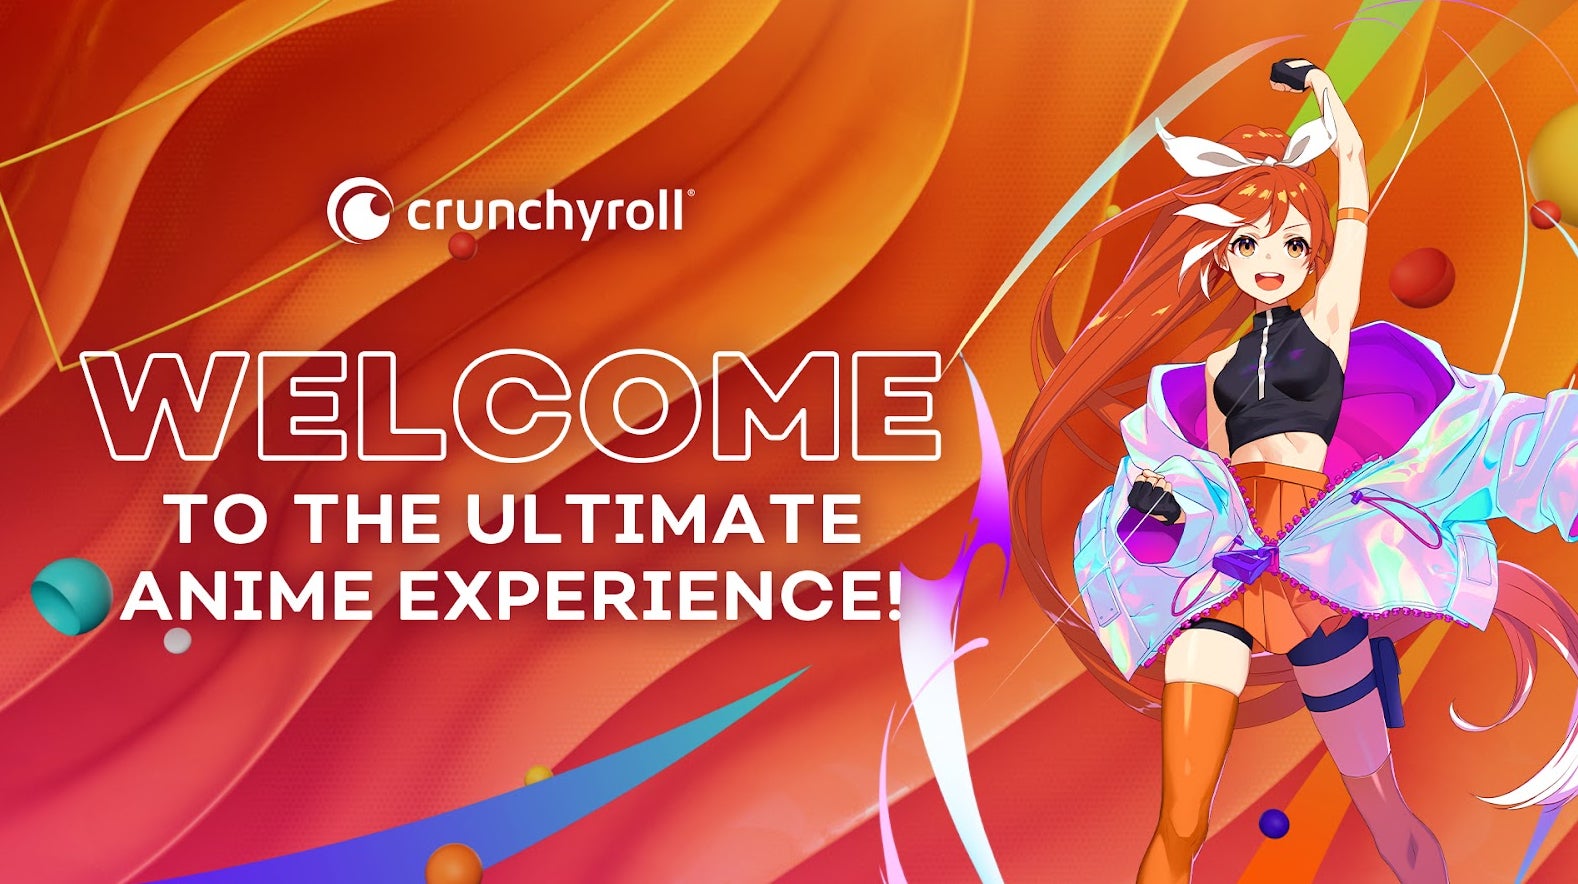 Funimation content comes to anime subscription Crunchyroll  Eurogamernet